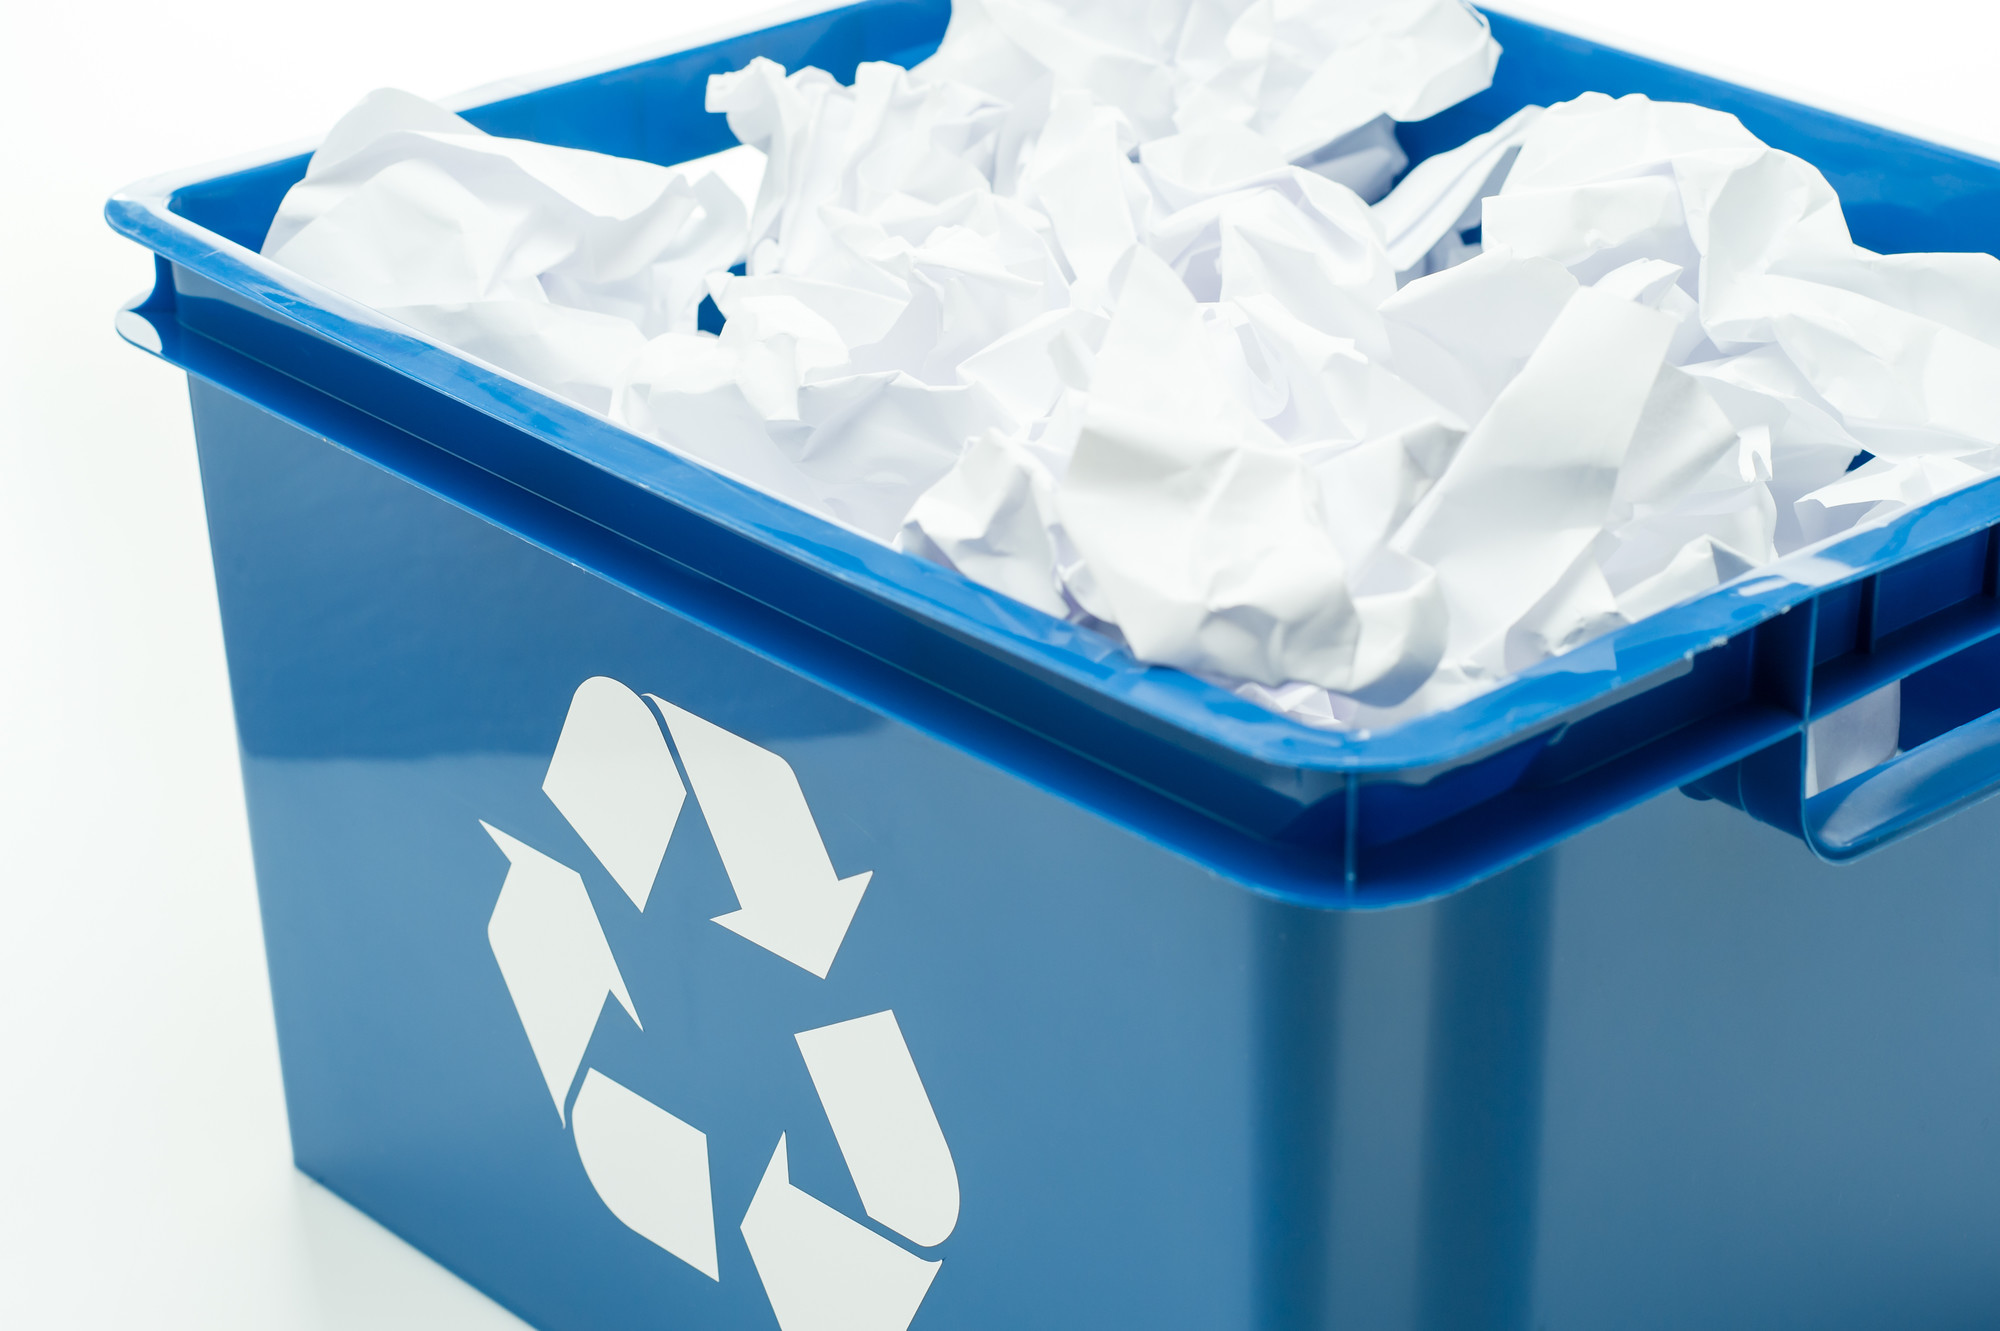 What You Should Know Before Hiring A Shredding Company